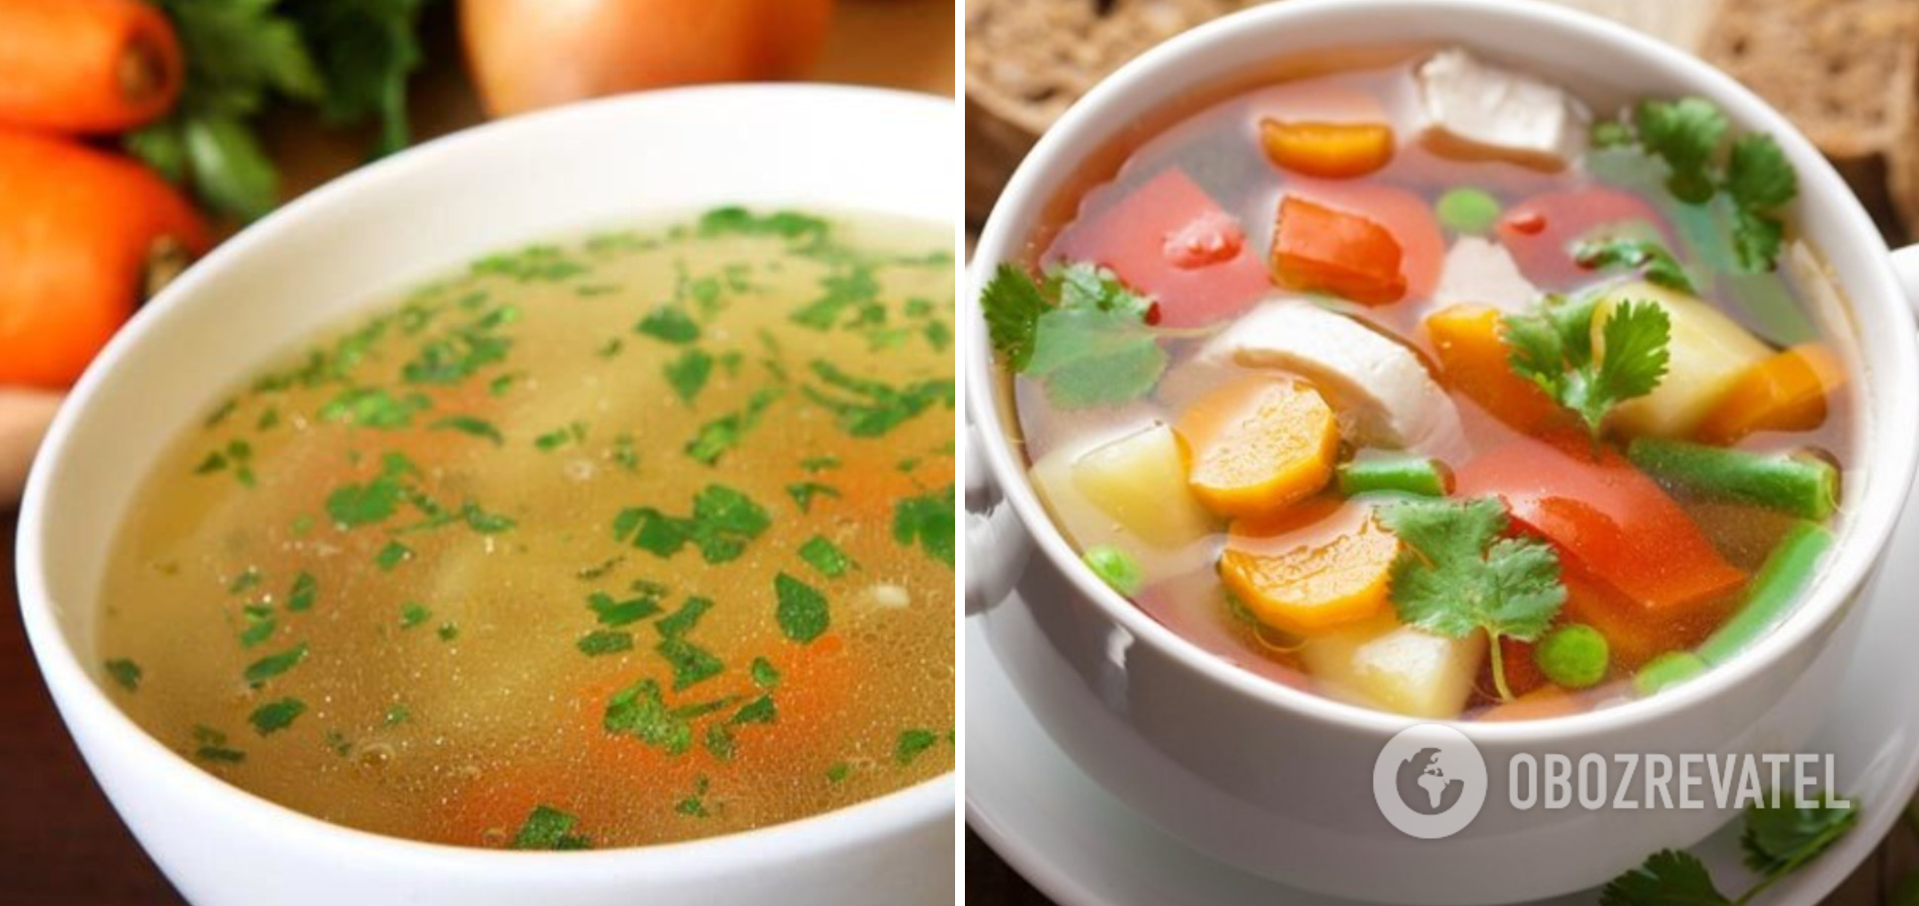 Vegetable soup in 15 minutes